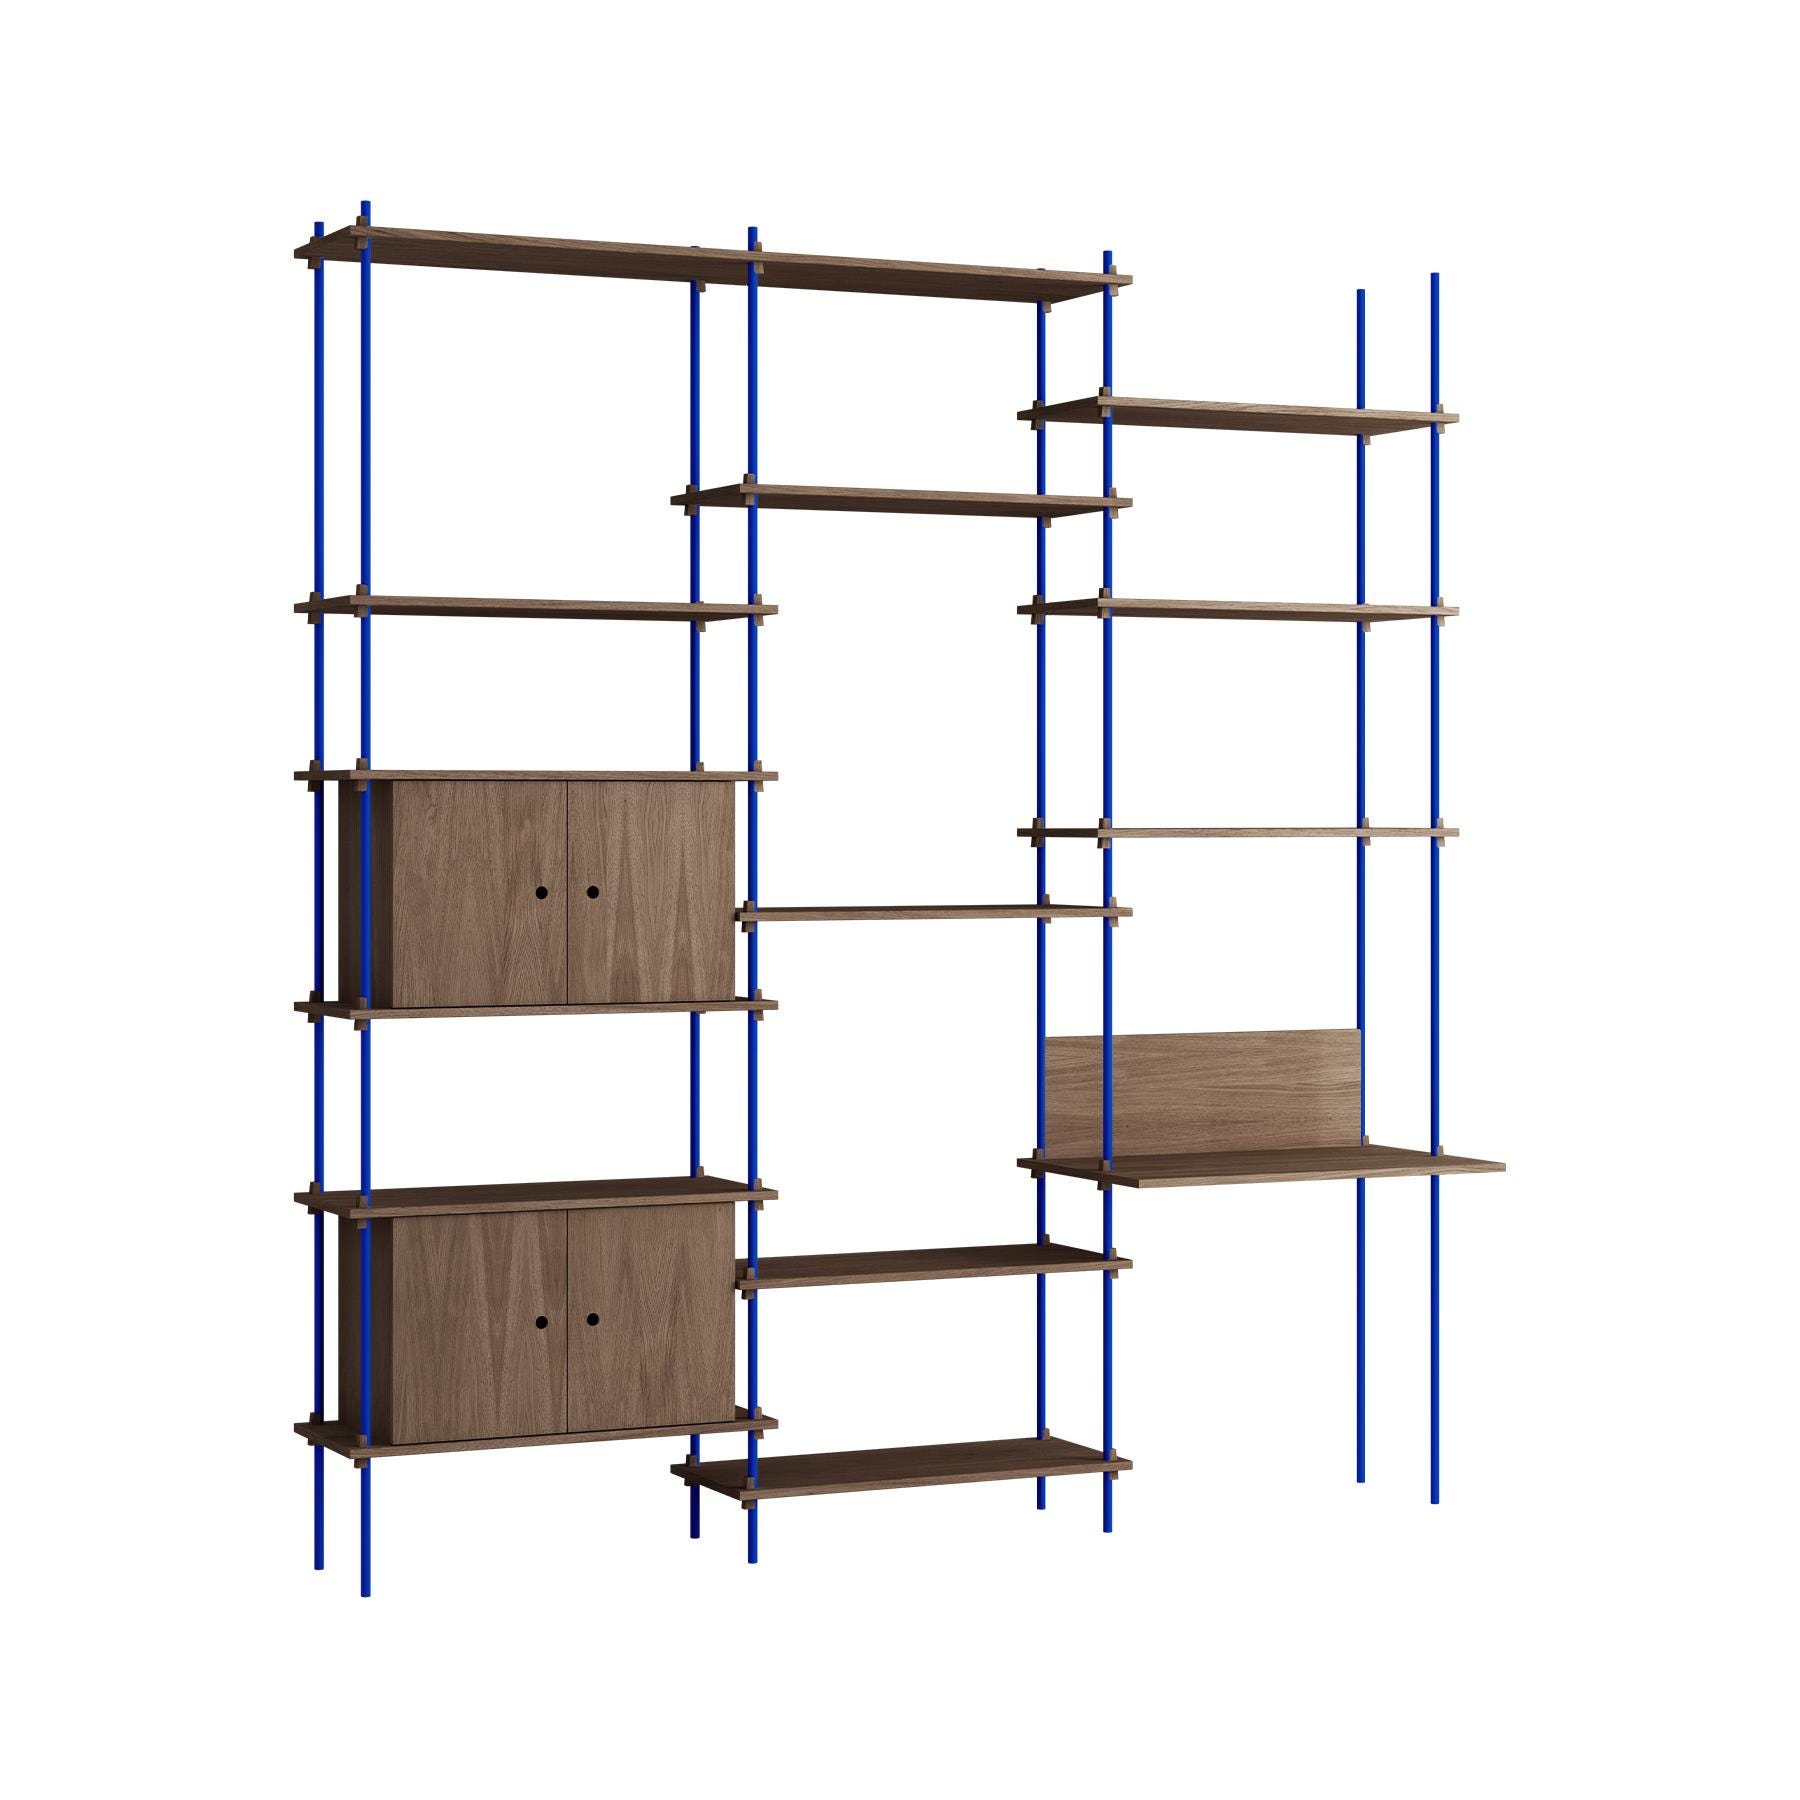 Moebe Triple Shelving System 2 Cabinets And Desk Smoked Oak Blue Dark Wood Designer Furniture From Holloways Of Ludlow